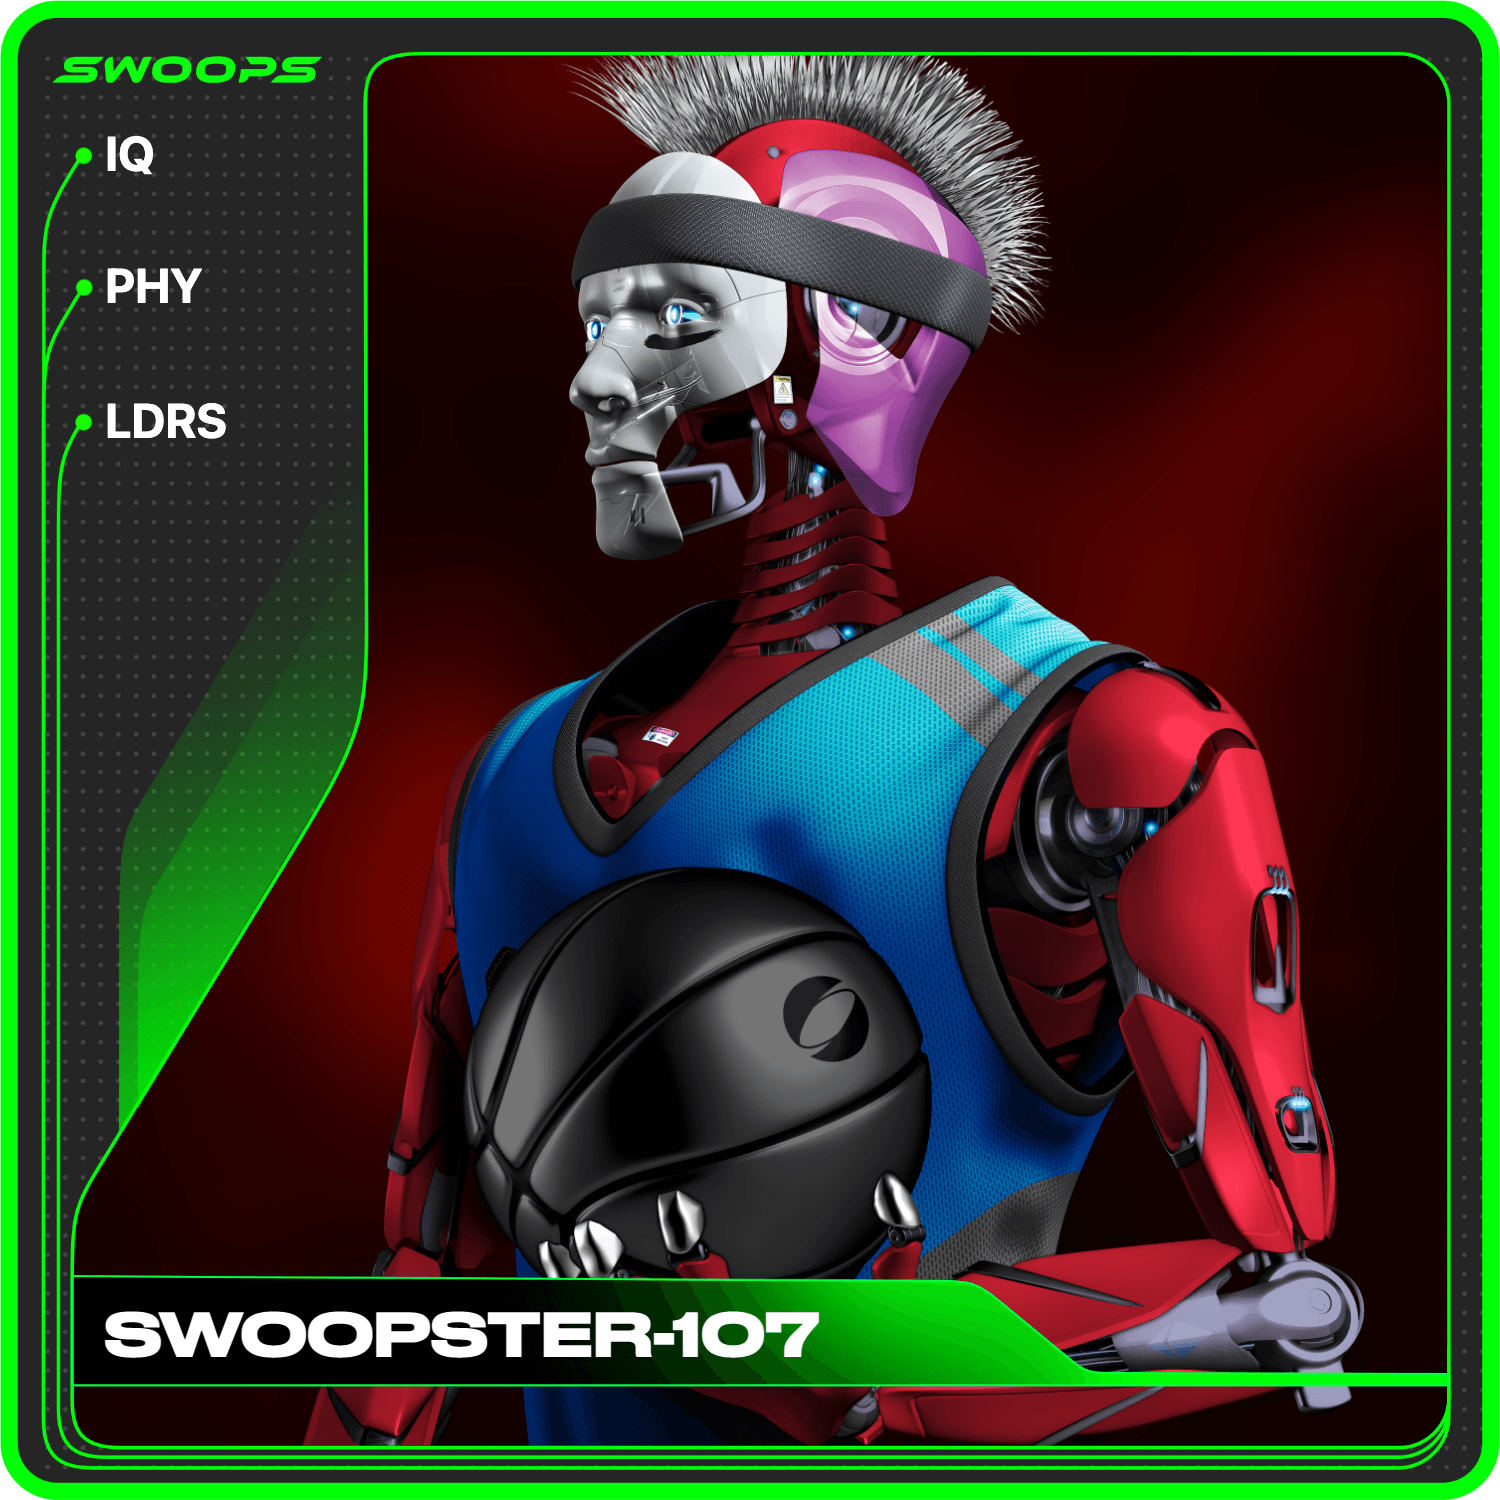 SWOOPSTER-107